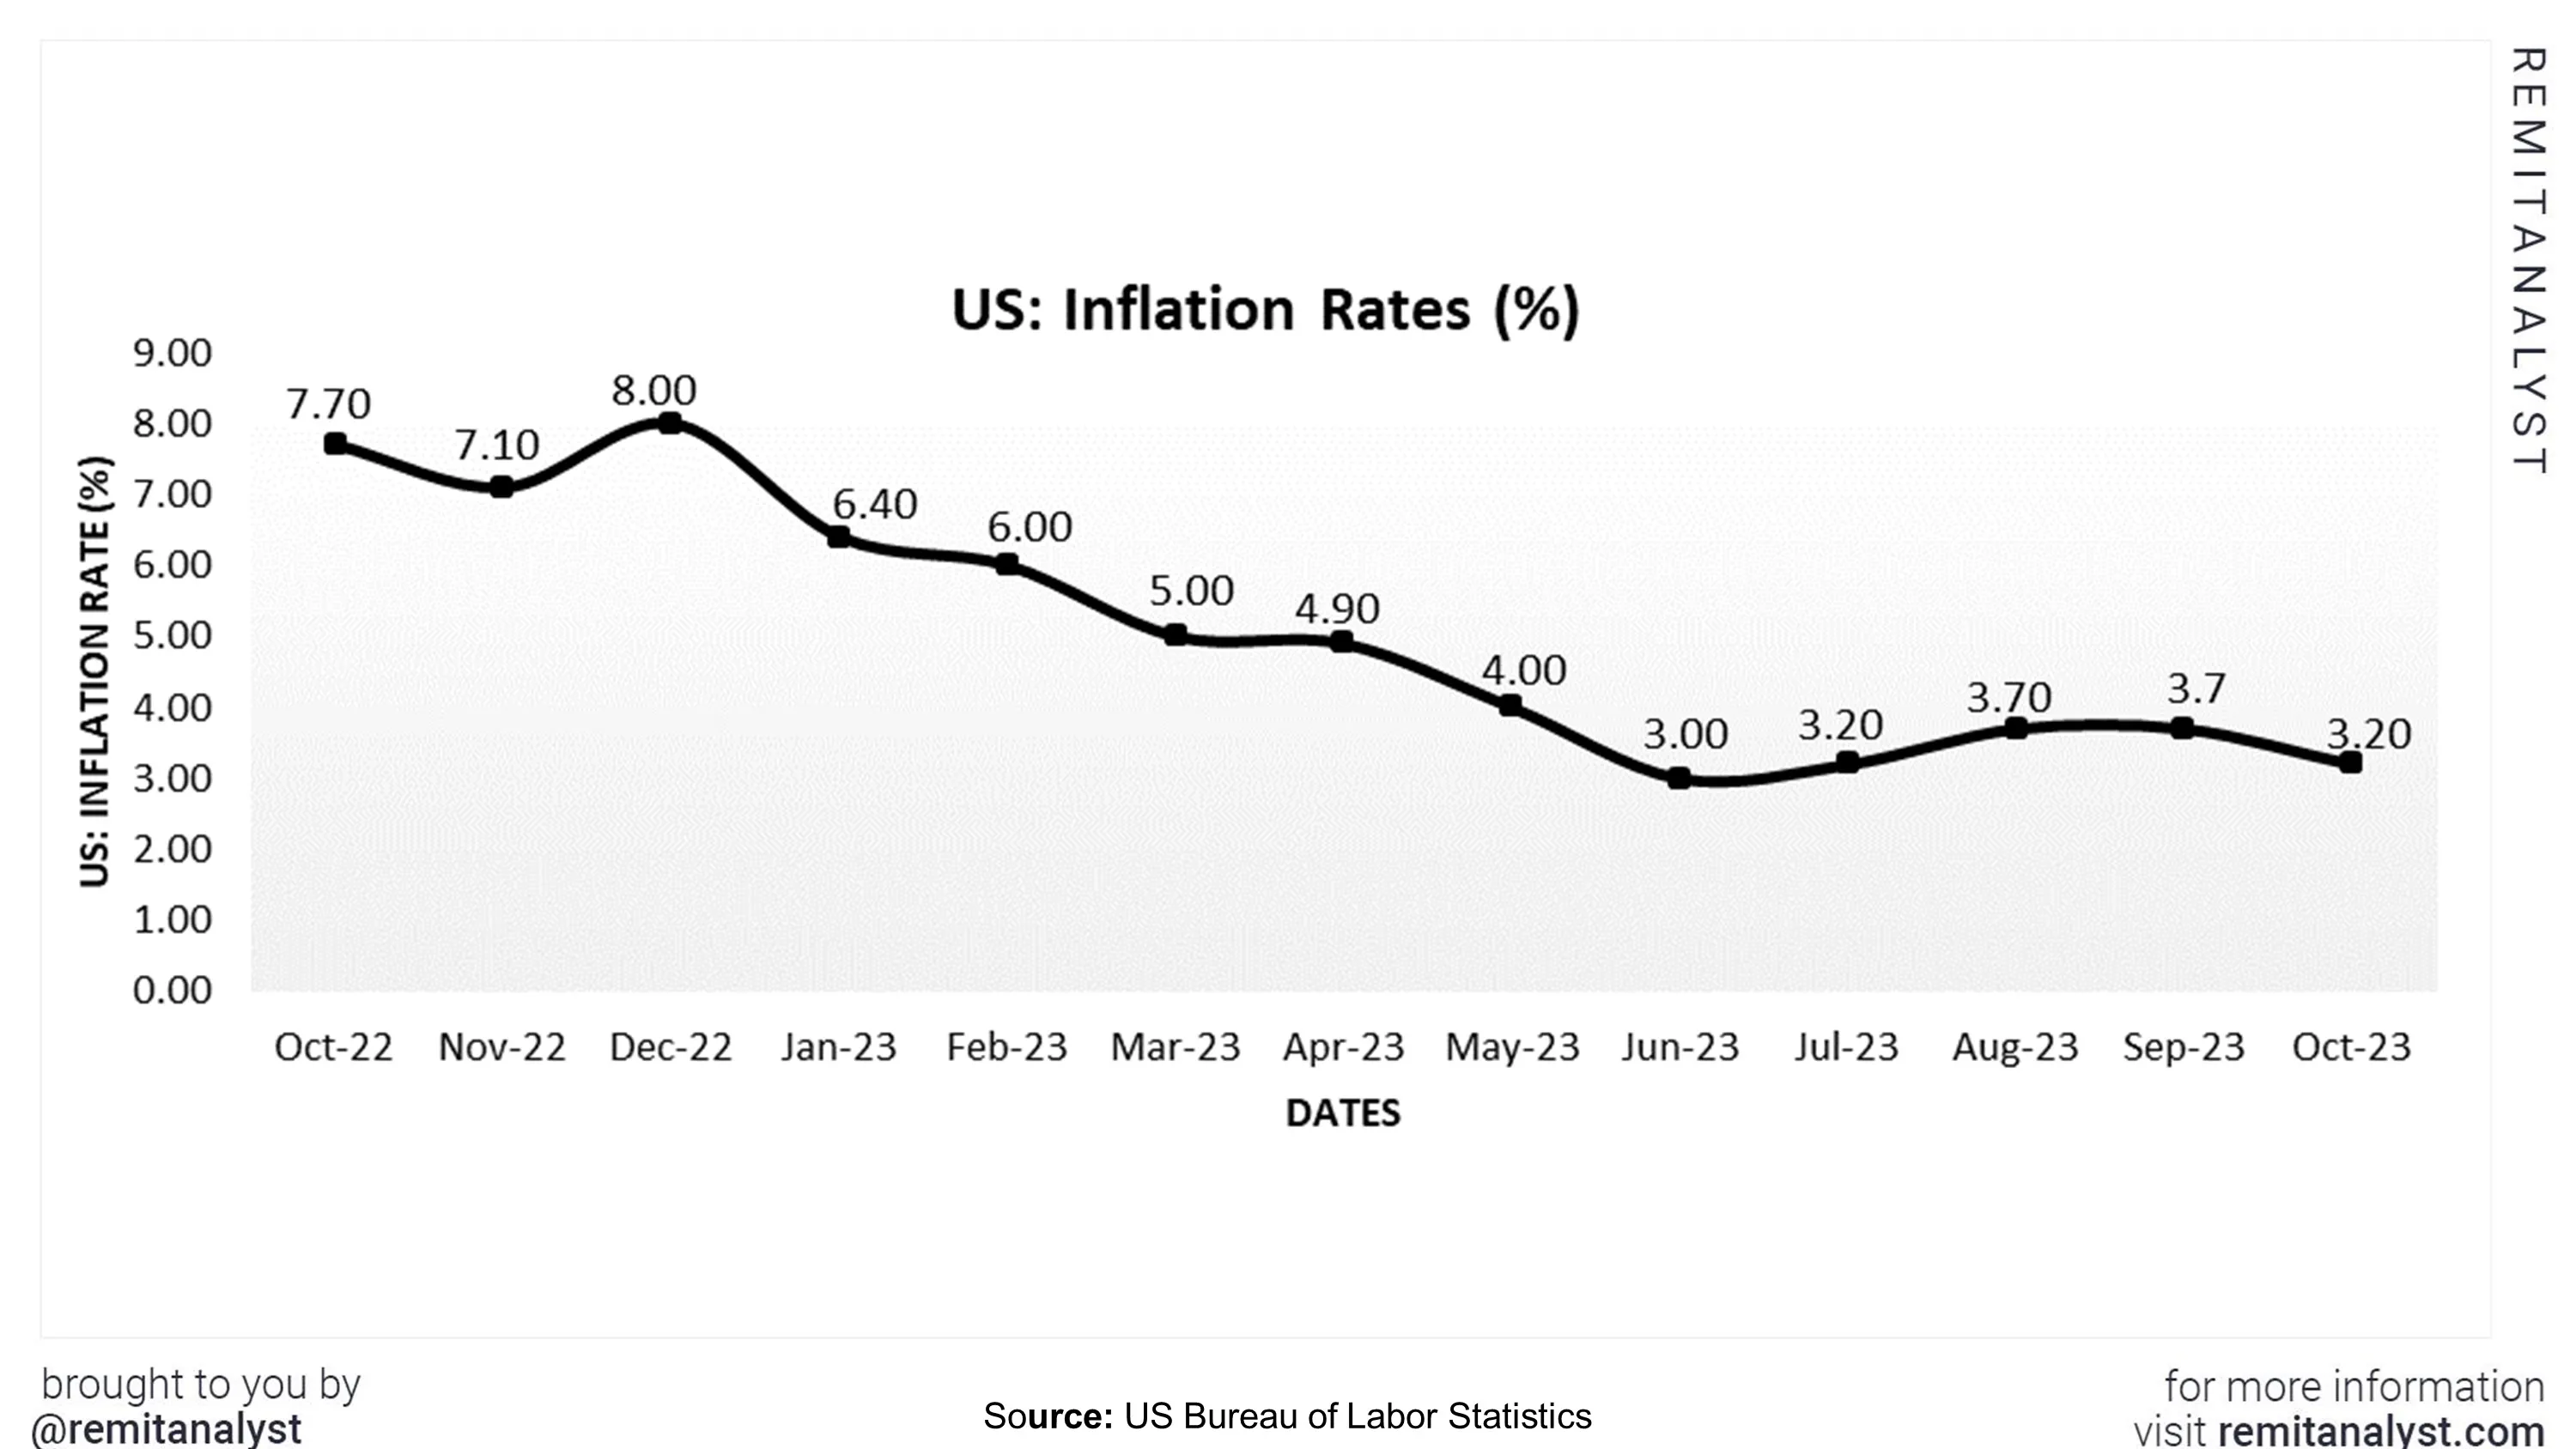 inflation-rates-in-us-from-oct-2022-to-oct-2023